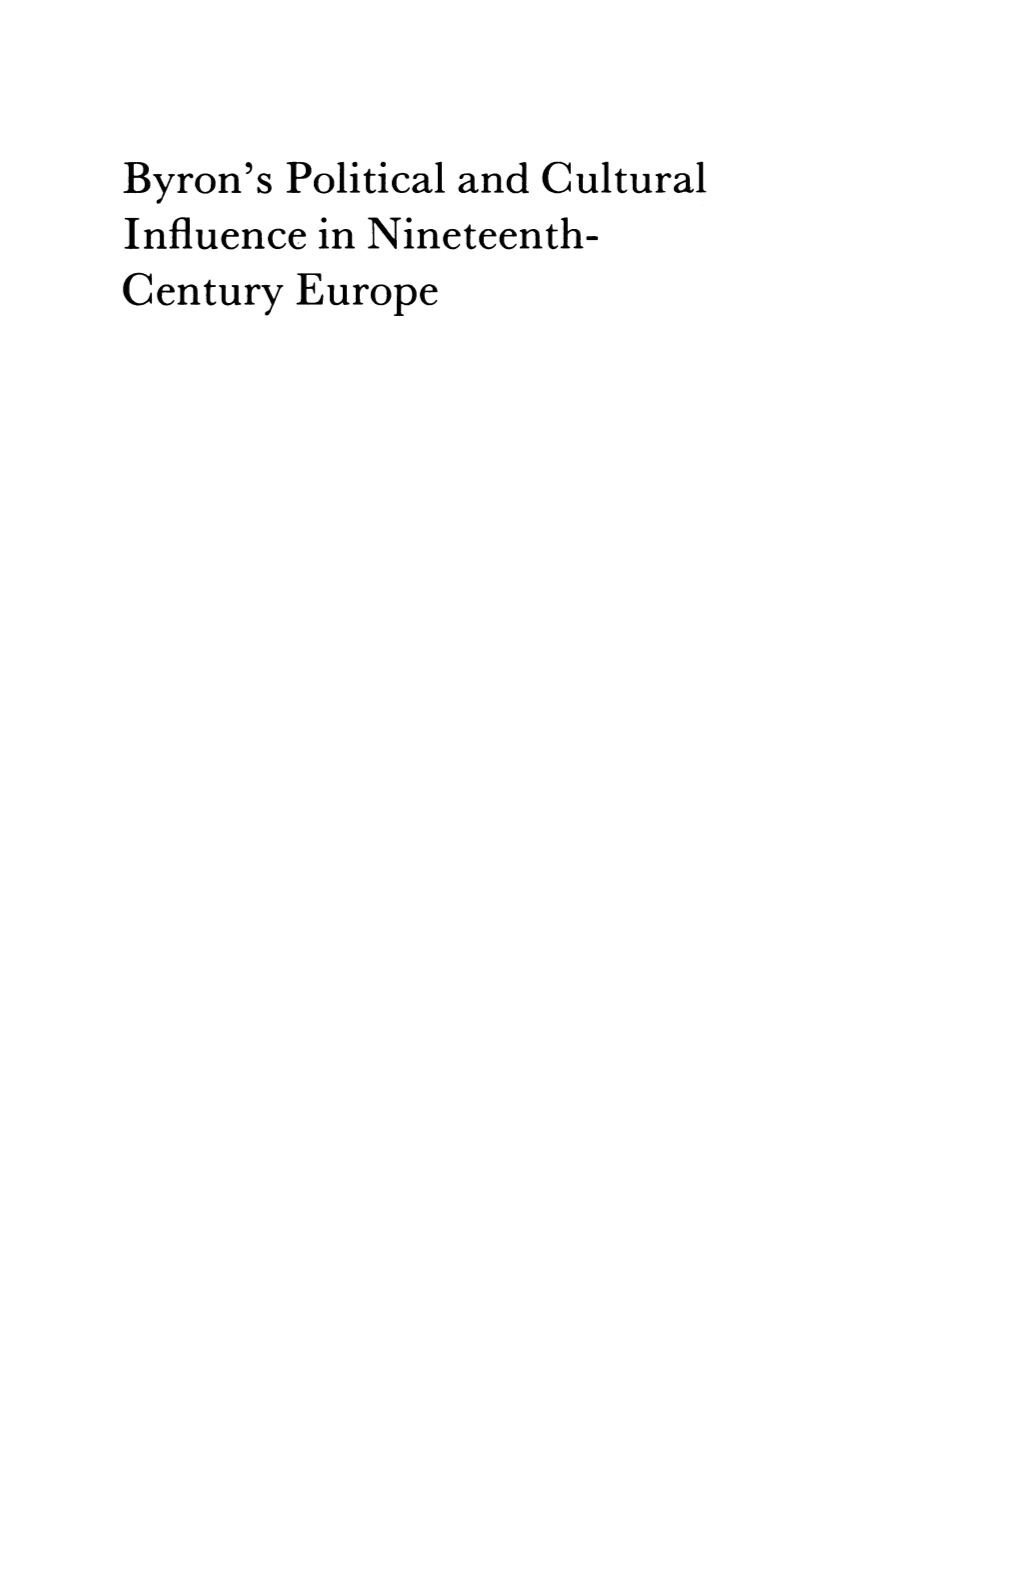 Byron's Political and Cultural Influence in Nineteenth- Century Europe